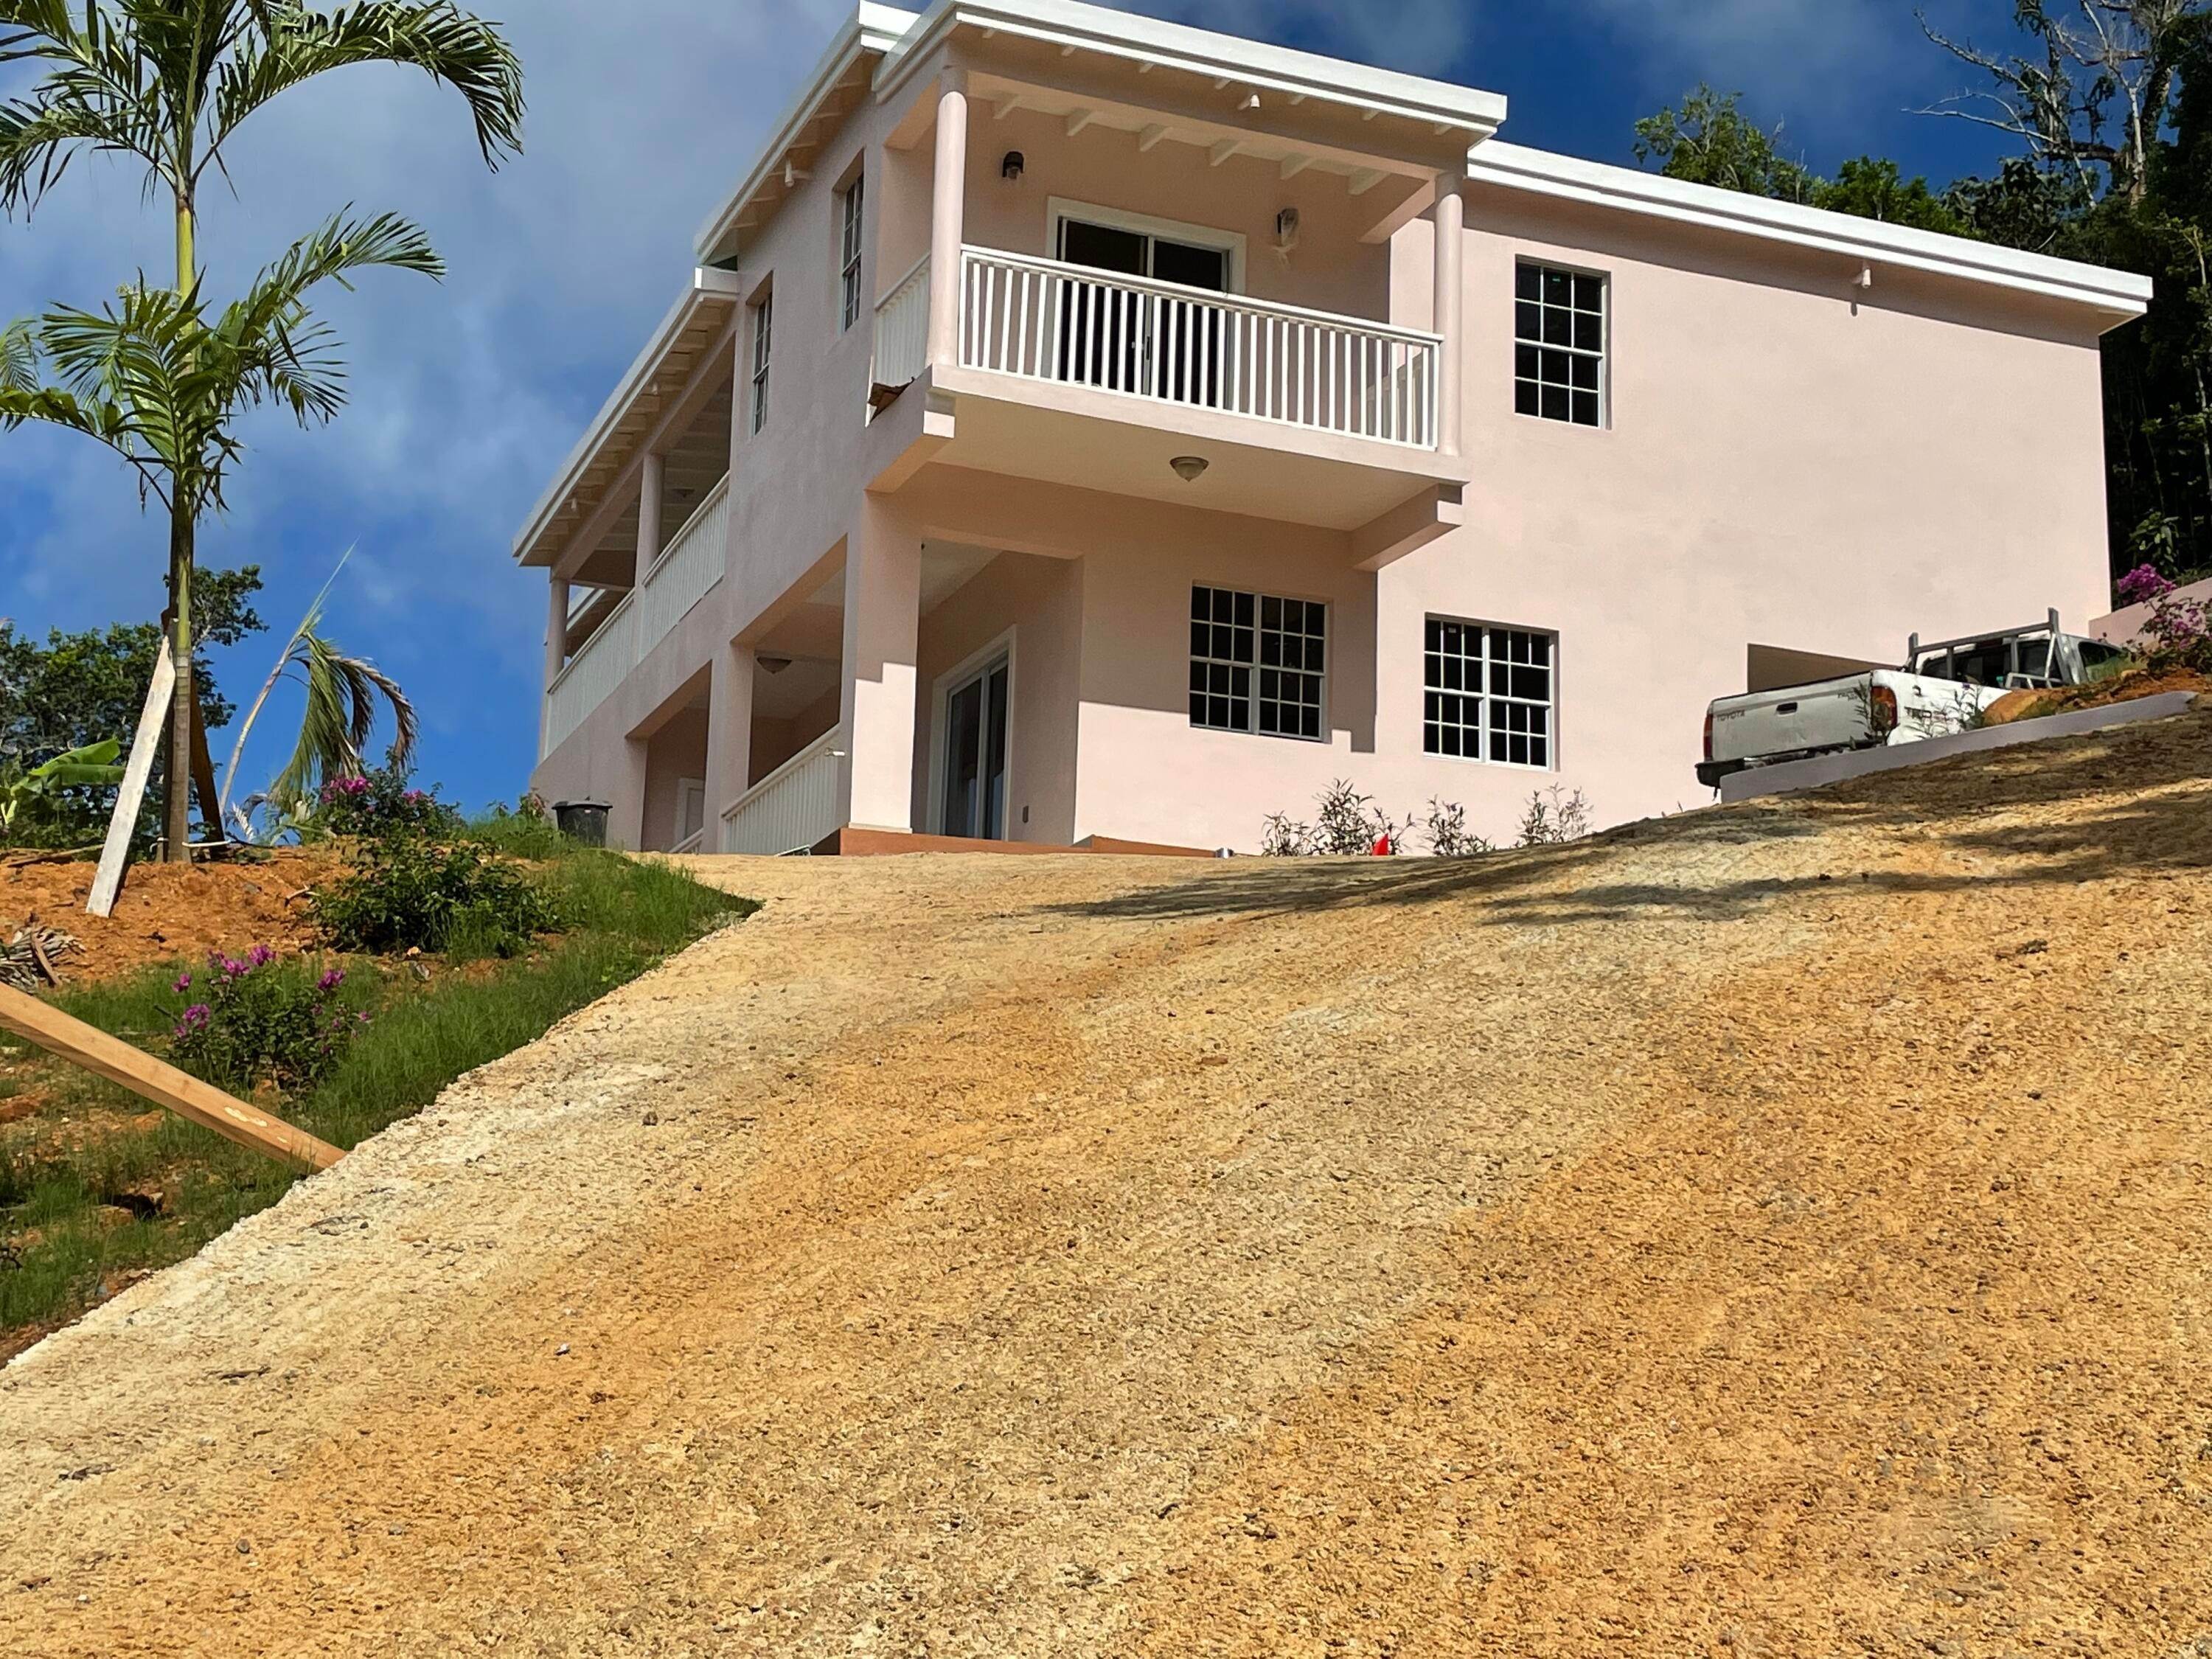 Multi-Family Homes for Sale at 99-1C Solberg LNS St Thomas, Virgin Islands 00802 United States Virgin Islands